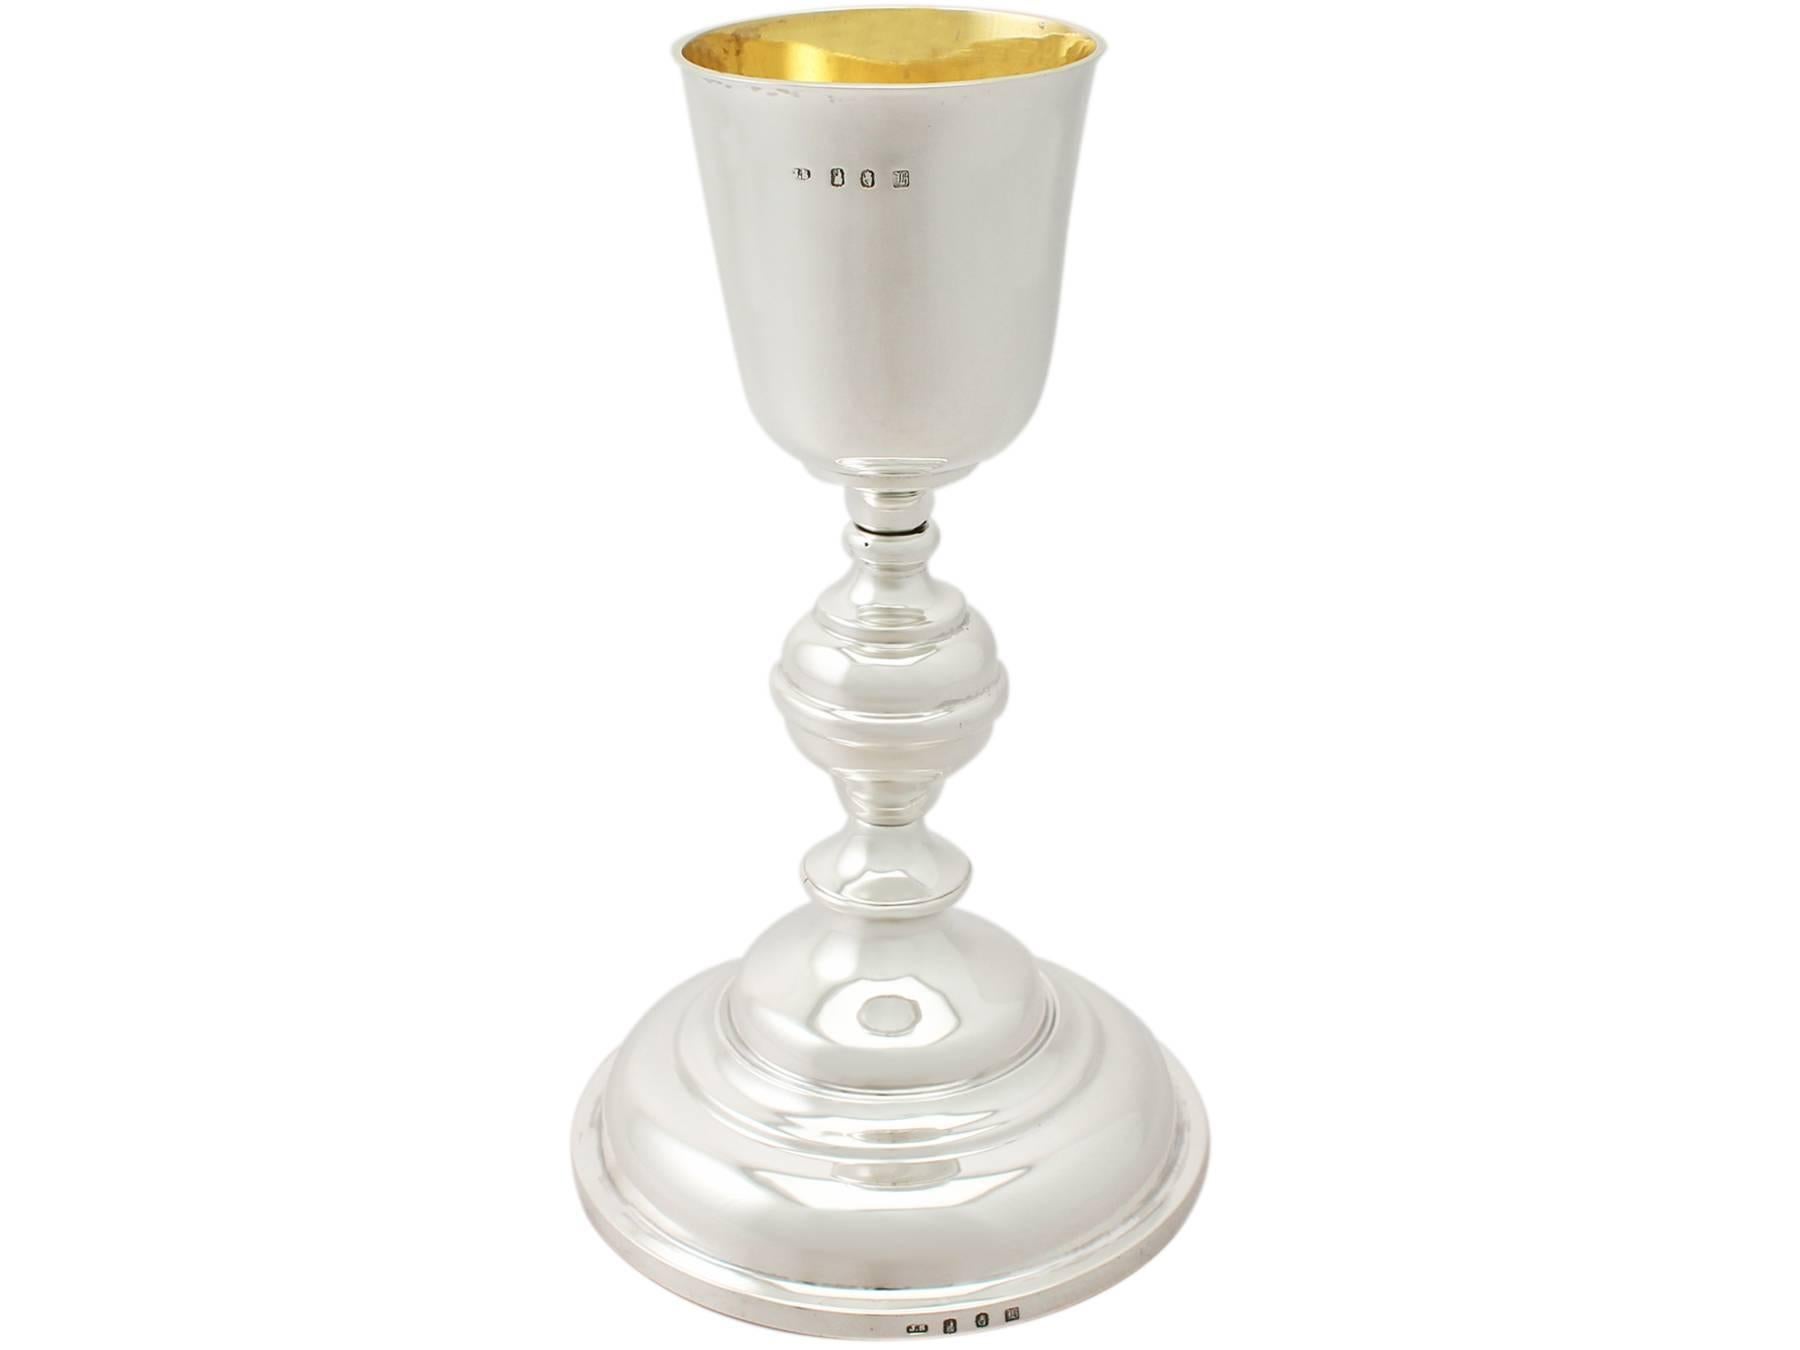 An exceptional, fine and impressive antique Edwardian Irish sterling silver chalice; an addition to our religious silverware collection

This exceptional antique Edwardian Irish sterling silver ecclesiastical chalice has a circular rounded bell